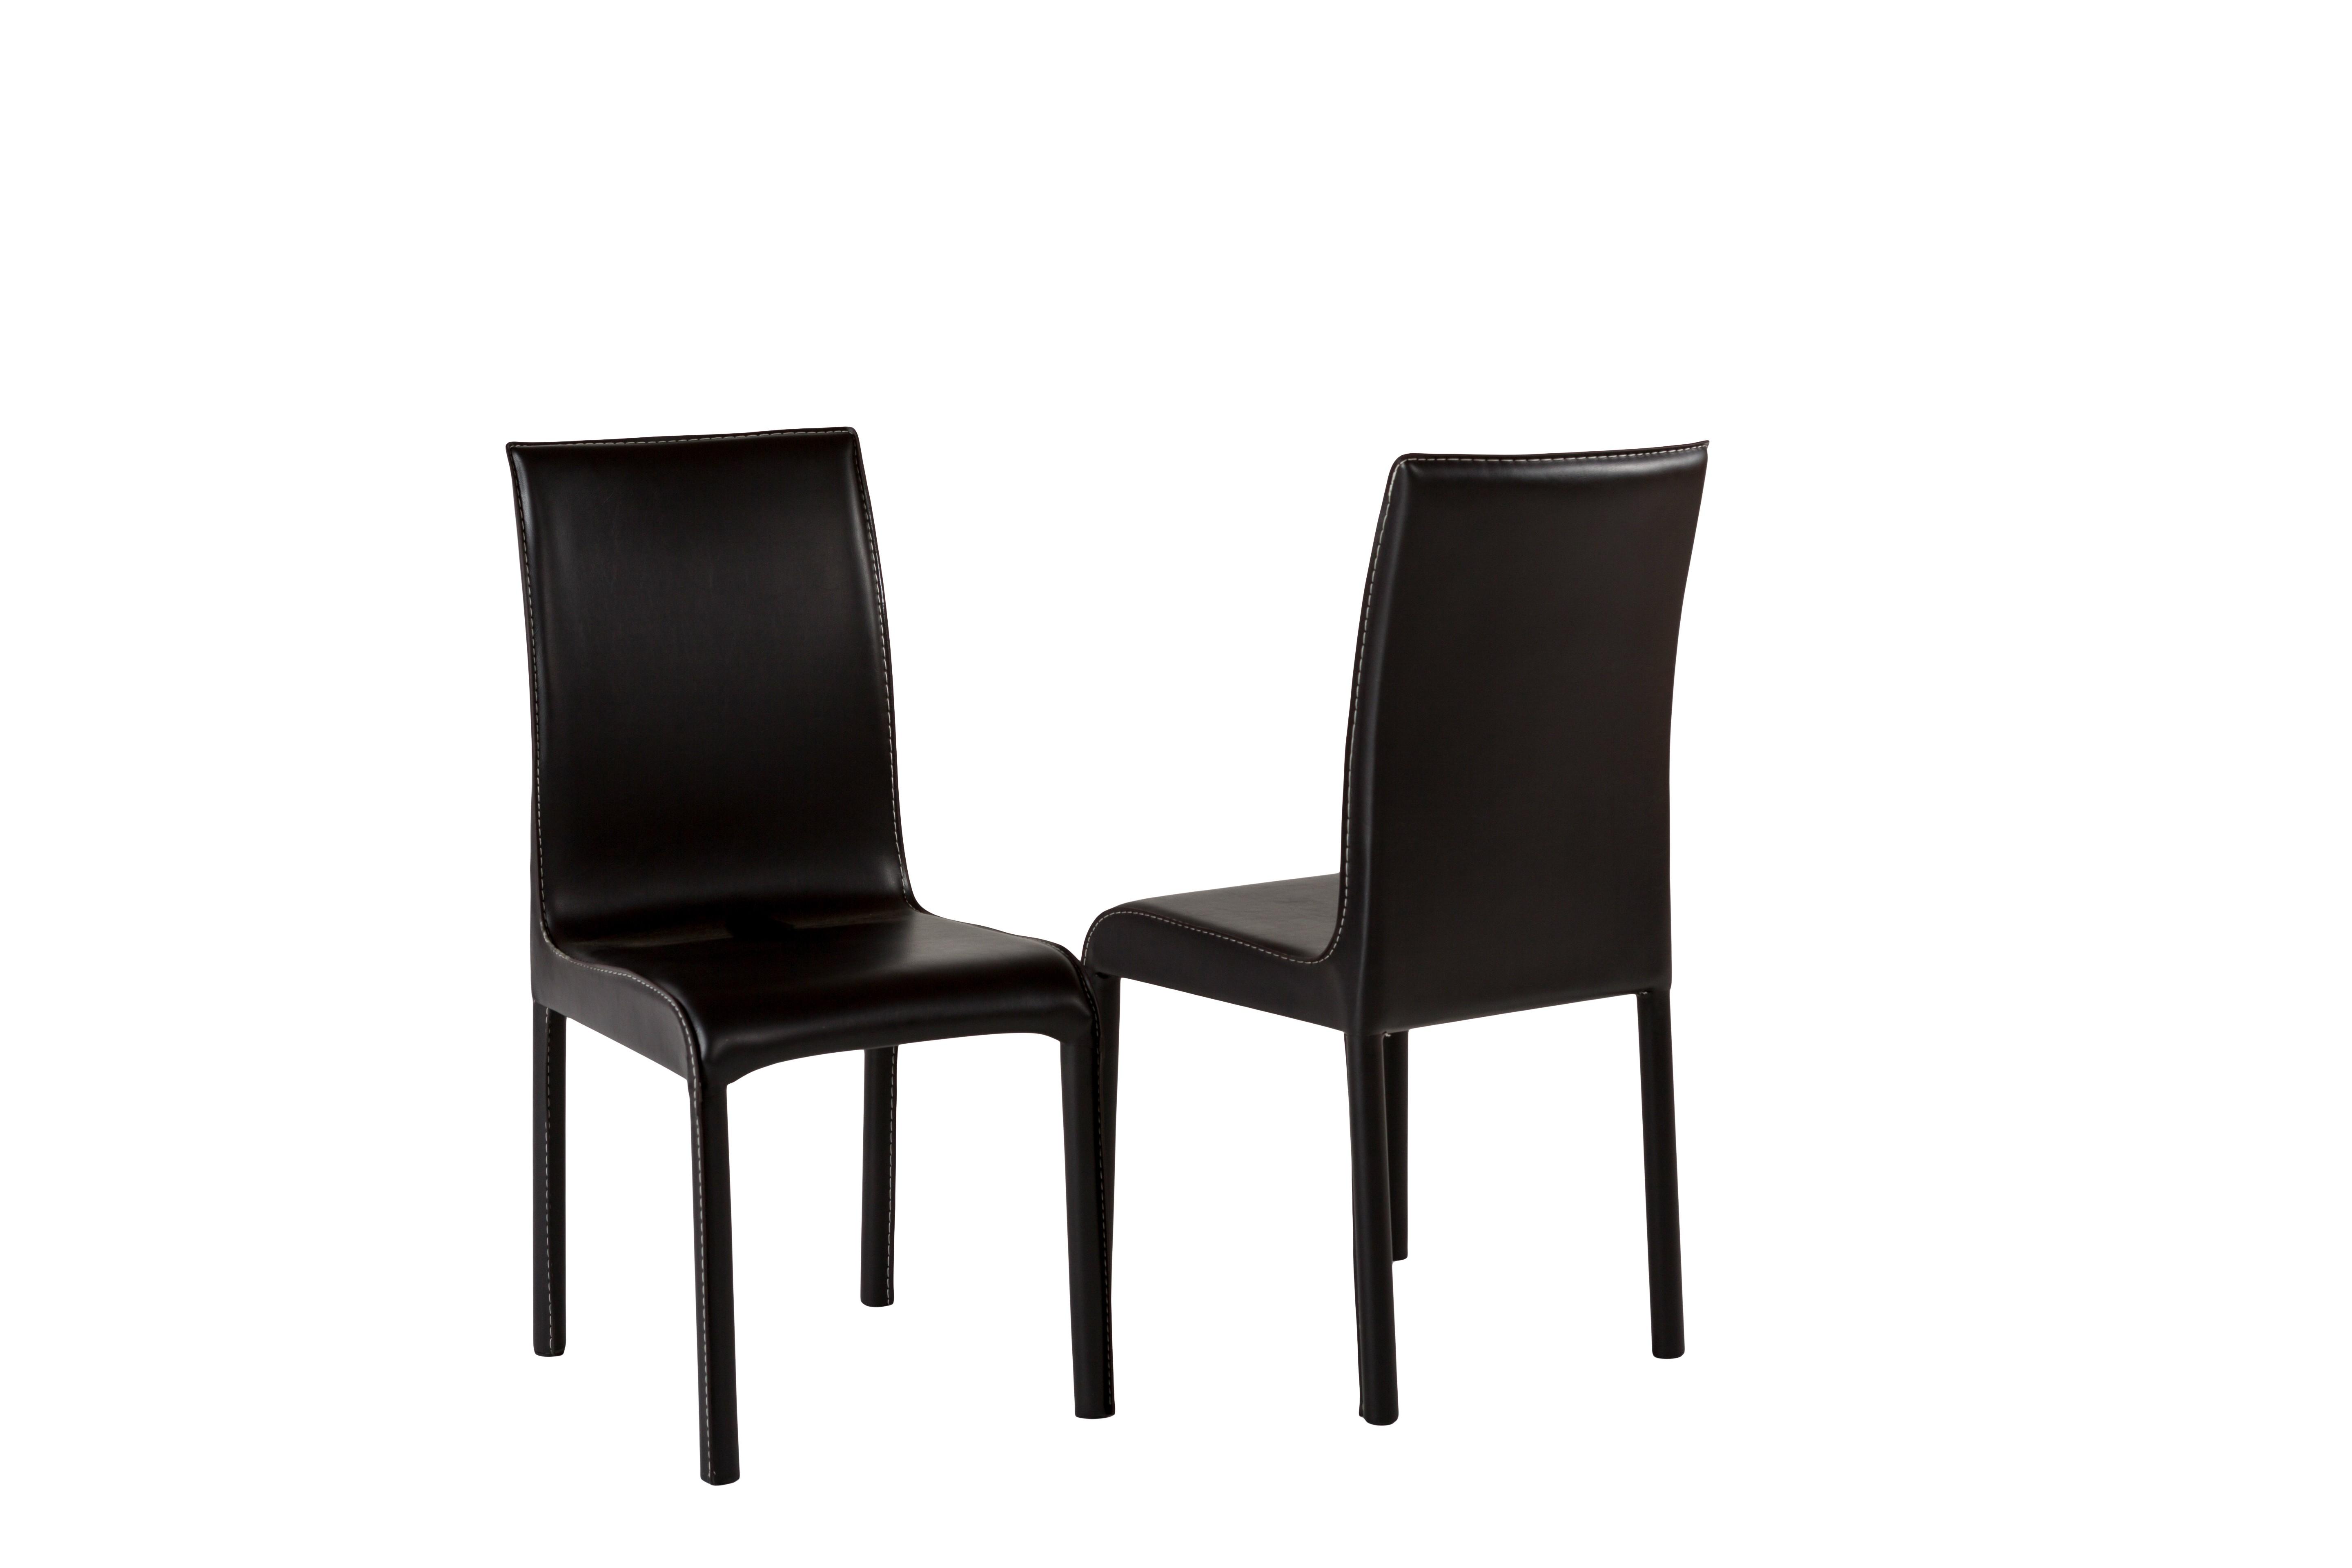 Contemporary Dining Side Chair Swansea SKUDC201028-DC8088-BLACK-set-6 in Black Eco-Leather